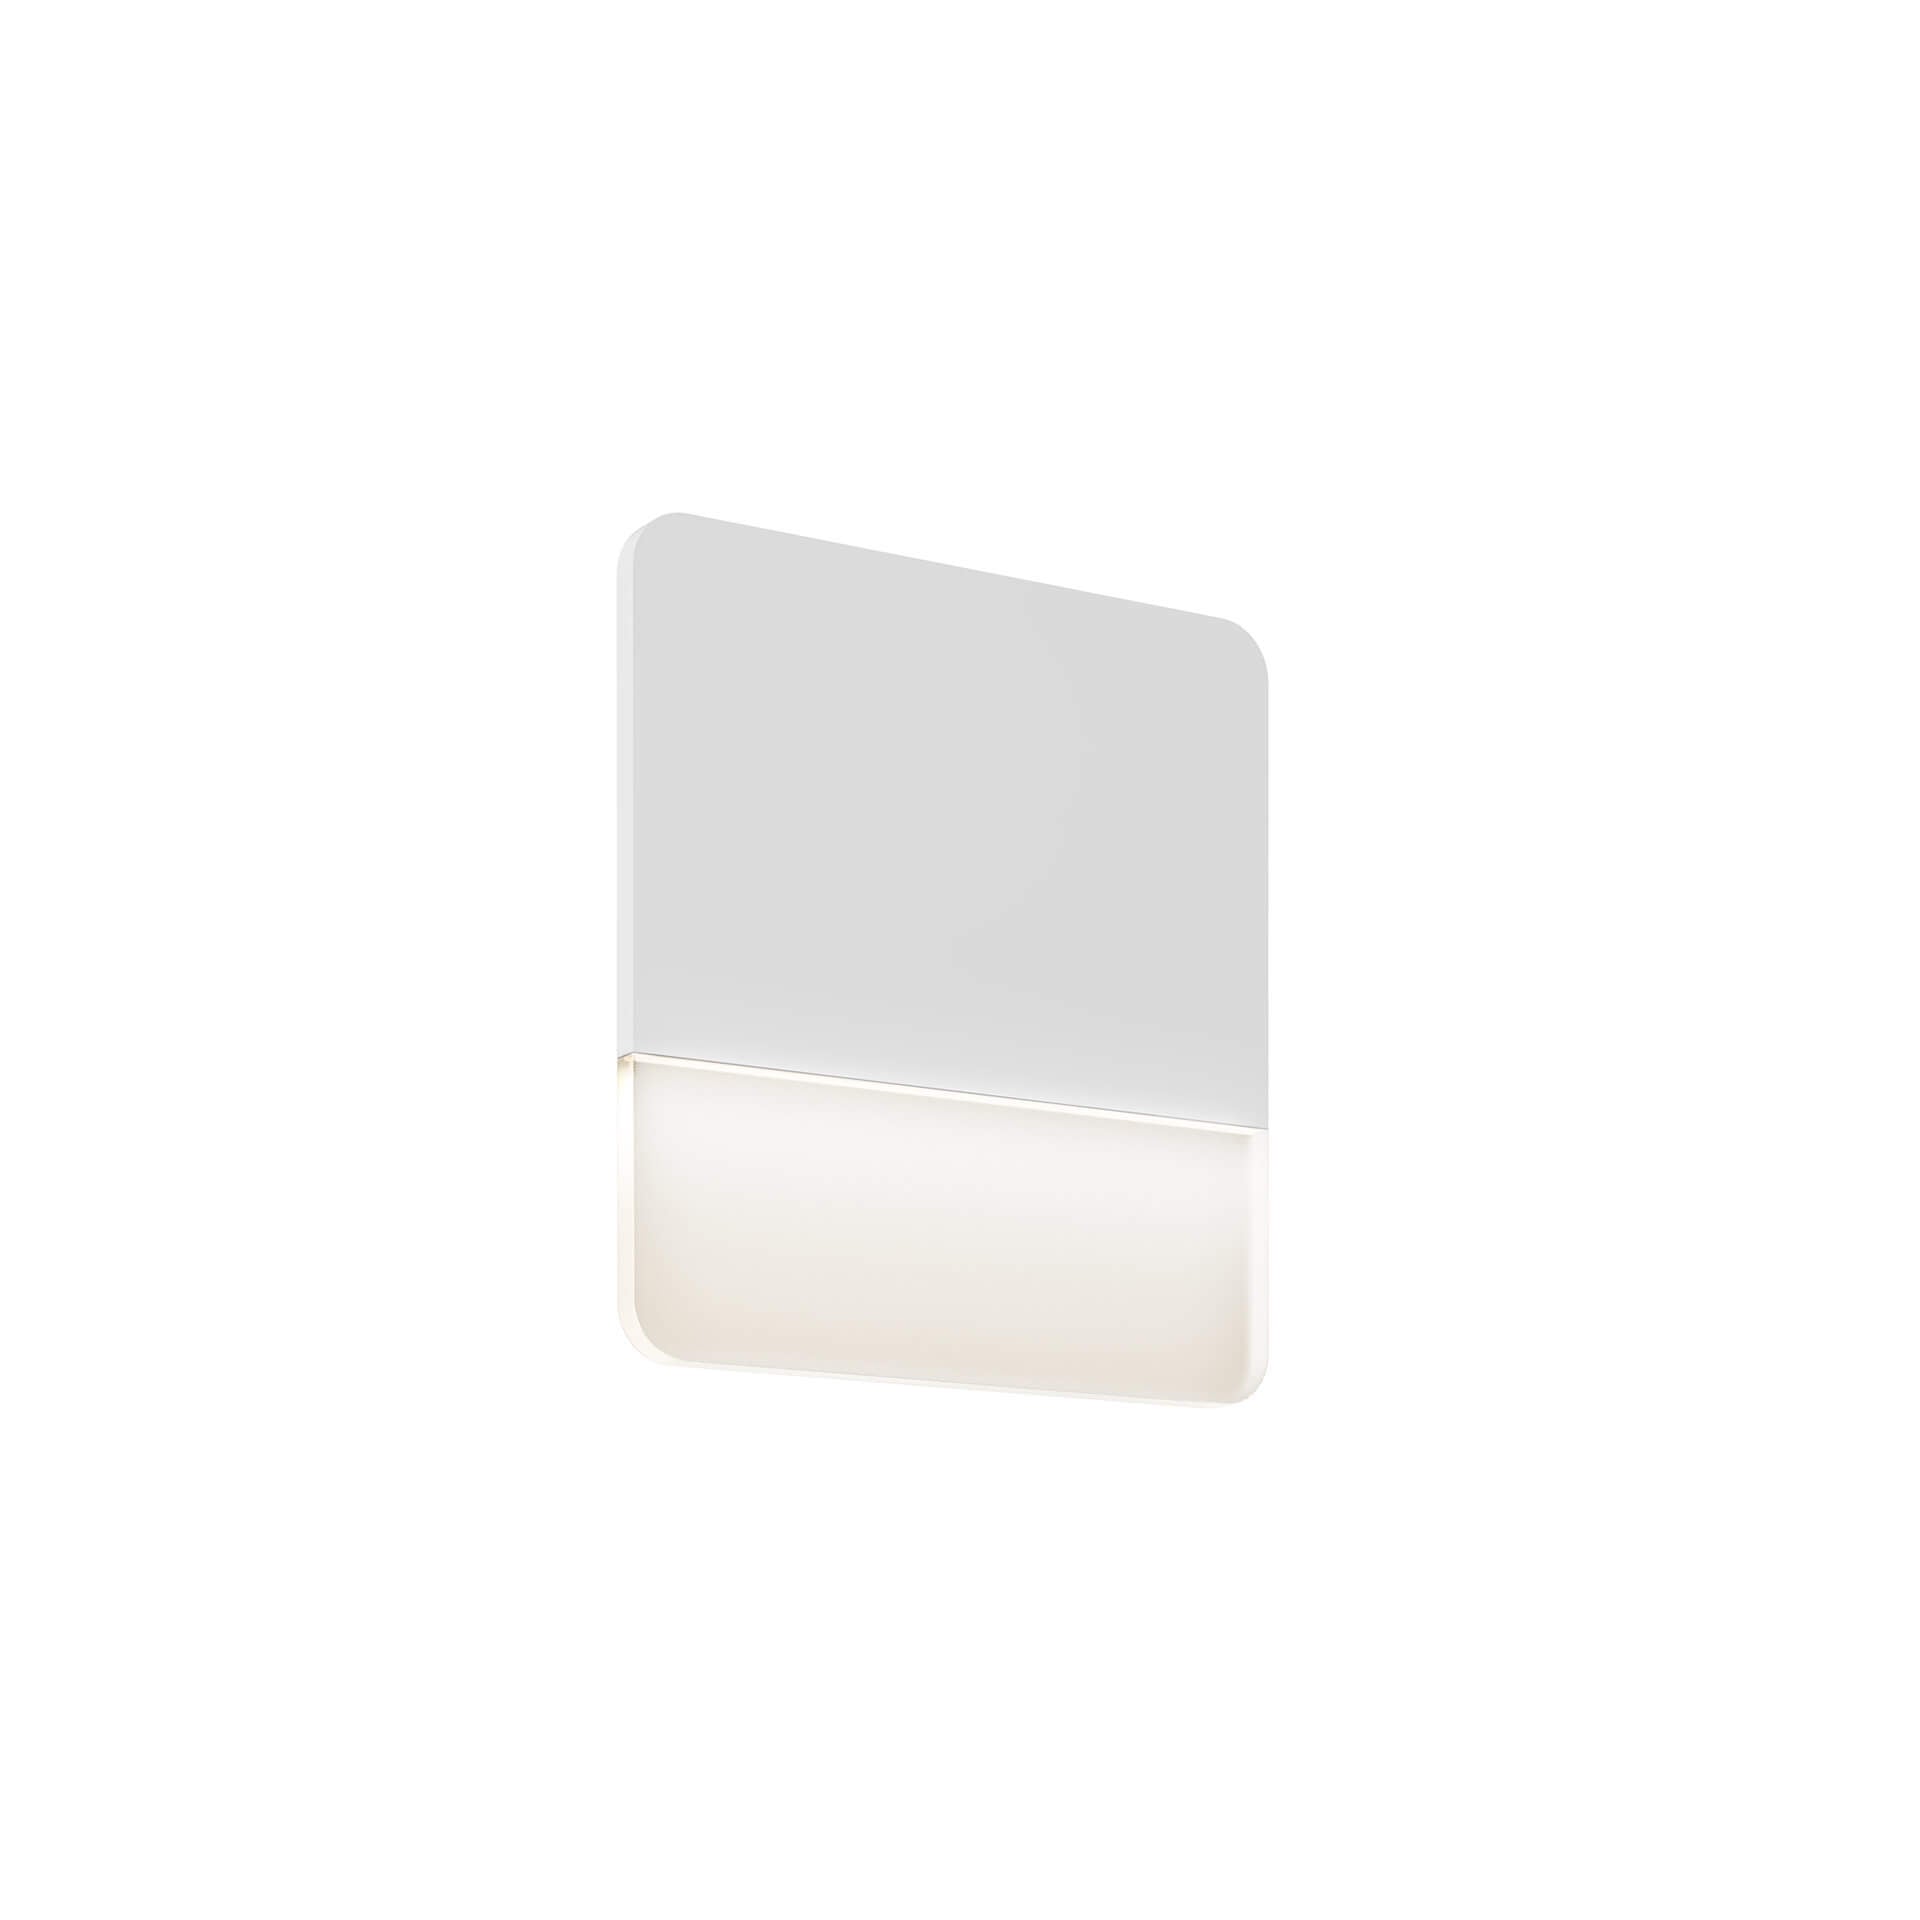 DALS Lighting FORMS 15 Inch Square Ultra Slim Wall Sconce